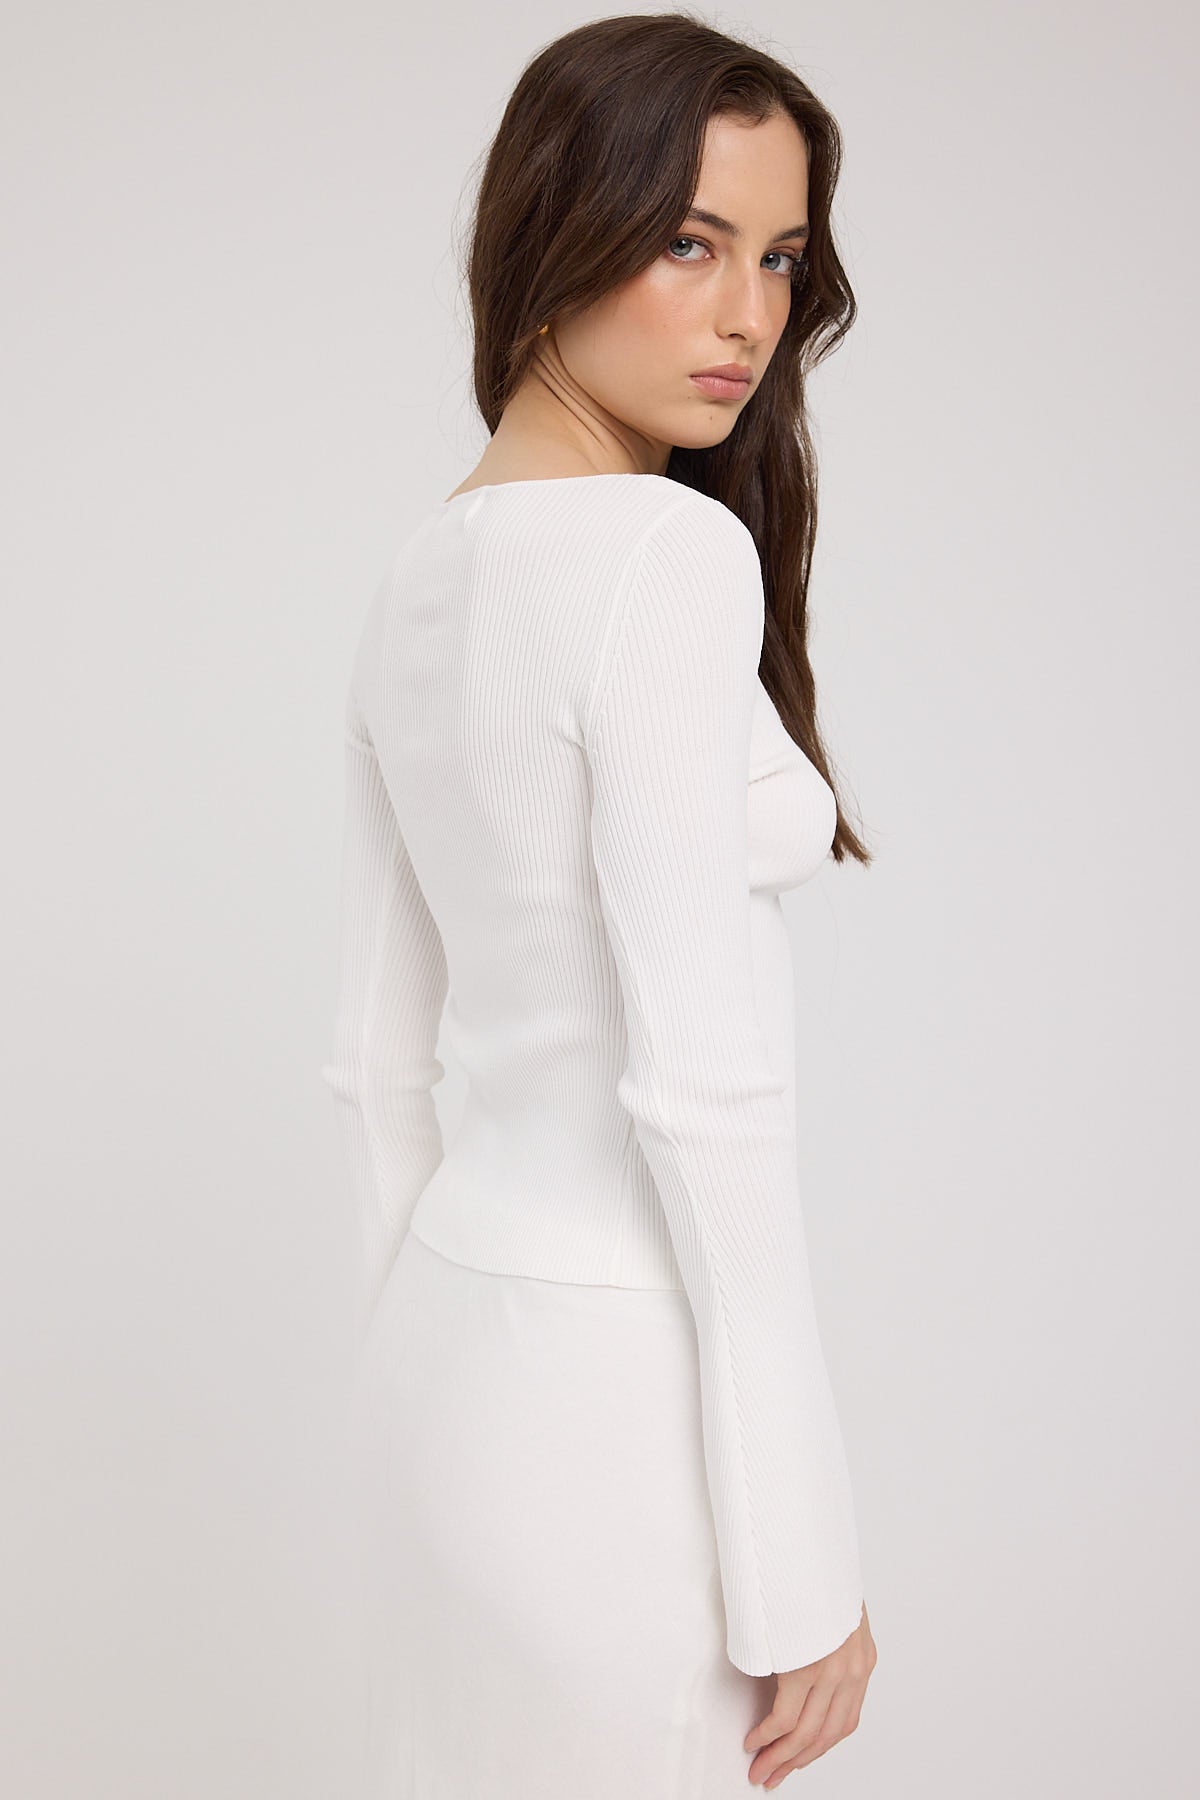 Perfect Stranger Tie Front Long Sleeve Knit Top White